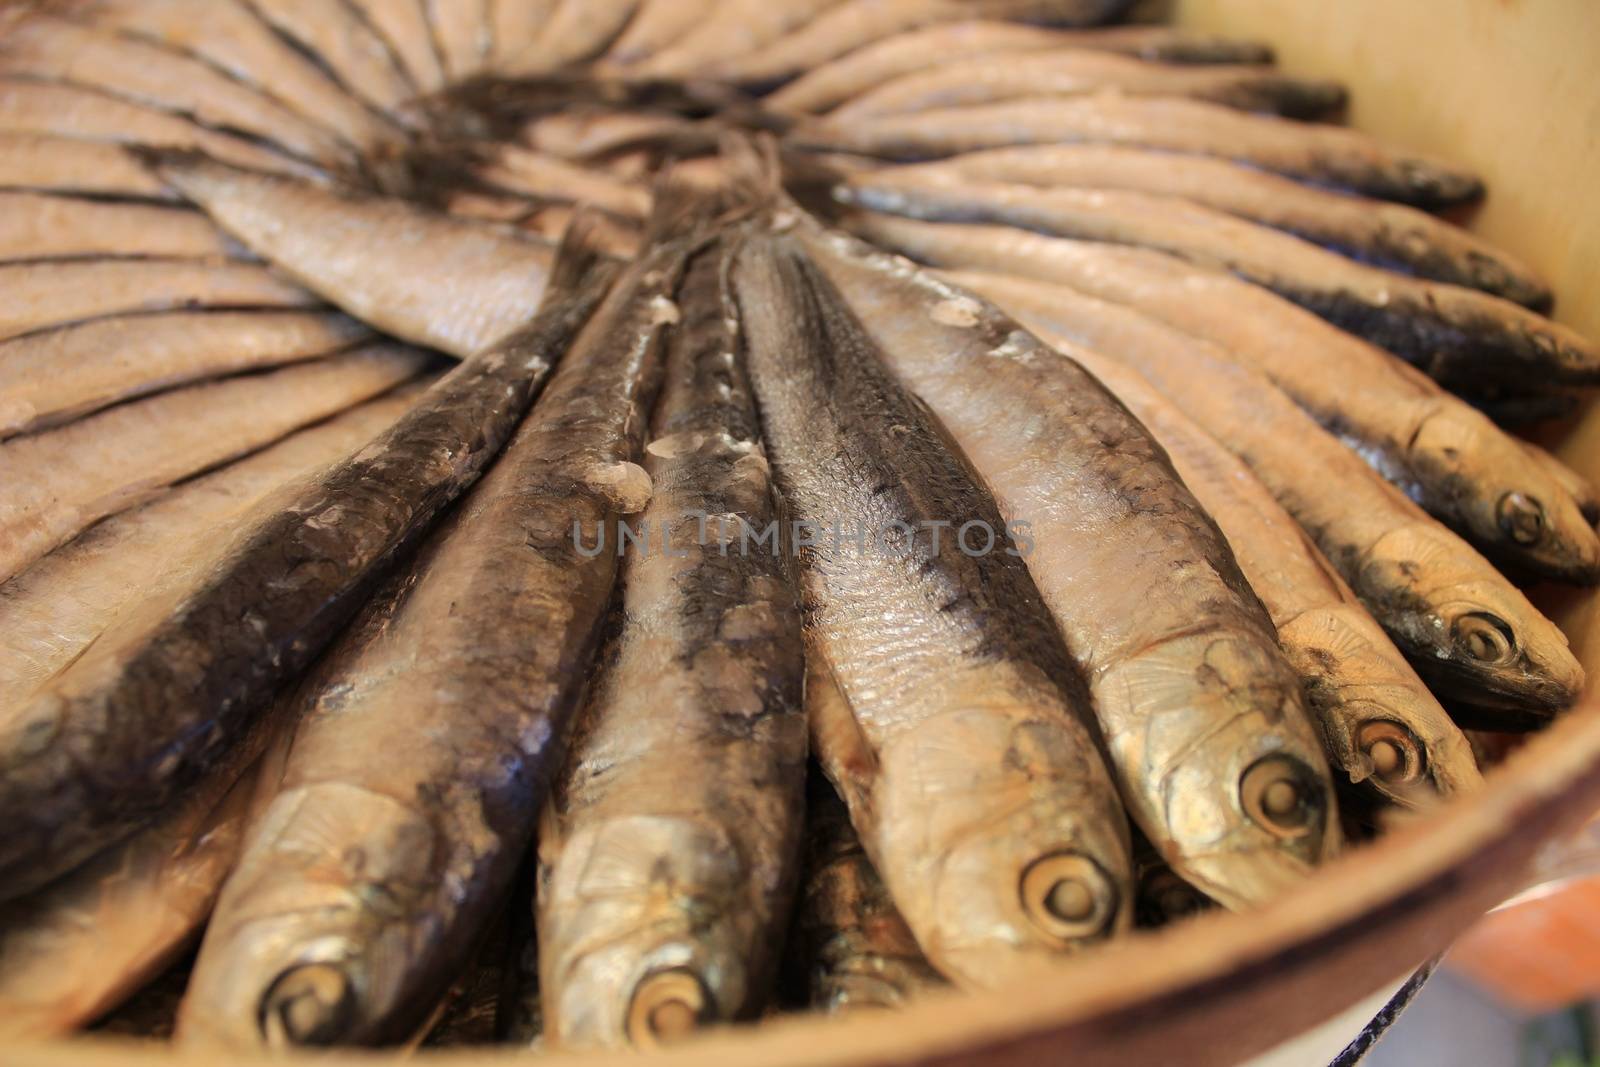 Salted fish products for sale at a market stall by soniabonet